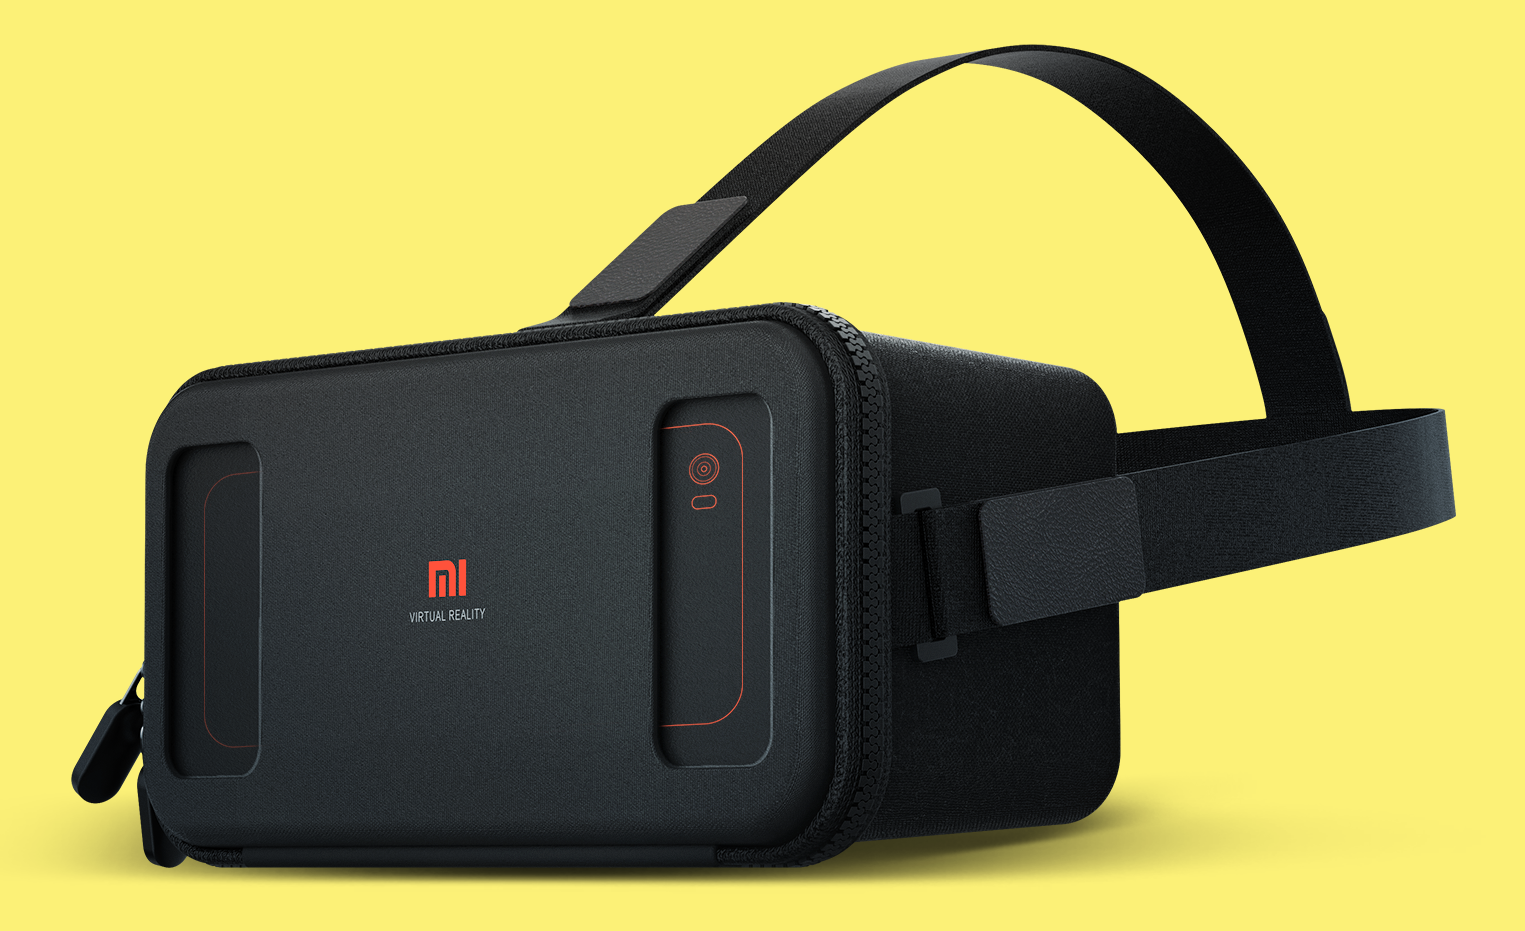 The Mi VR Play has a soft cover that zips closed to hold a phone in place.